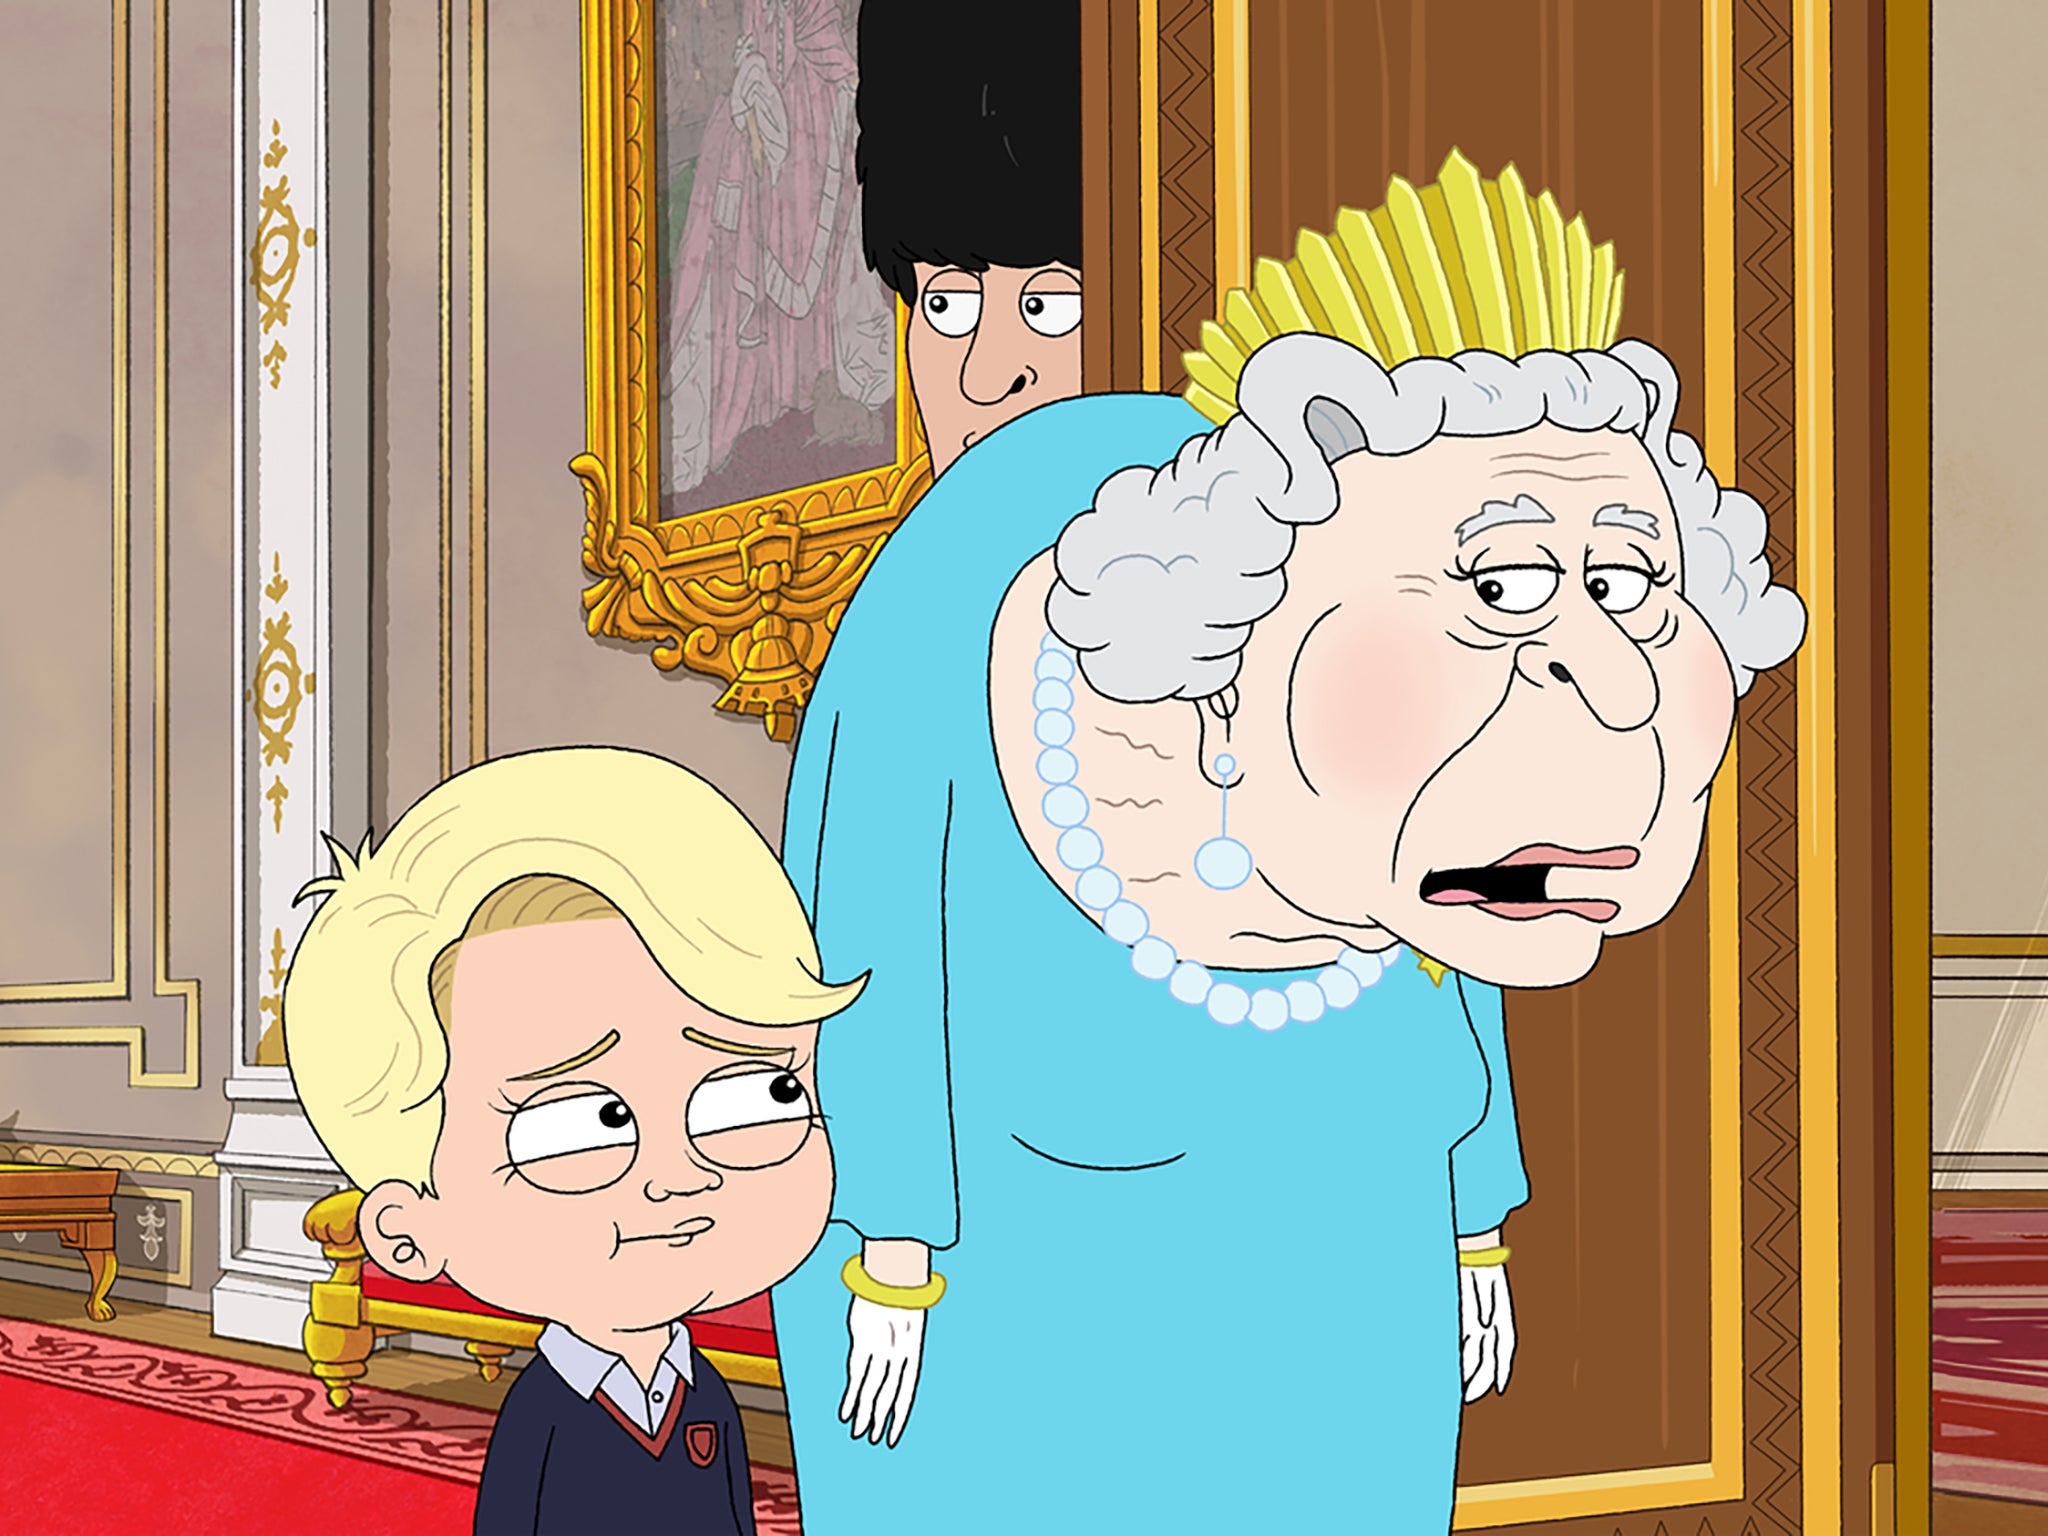 Royal mess: Prince George and the Queen in HBO Max’s ‘The Prince’